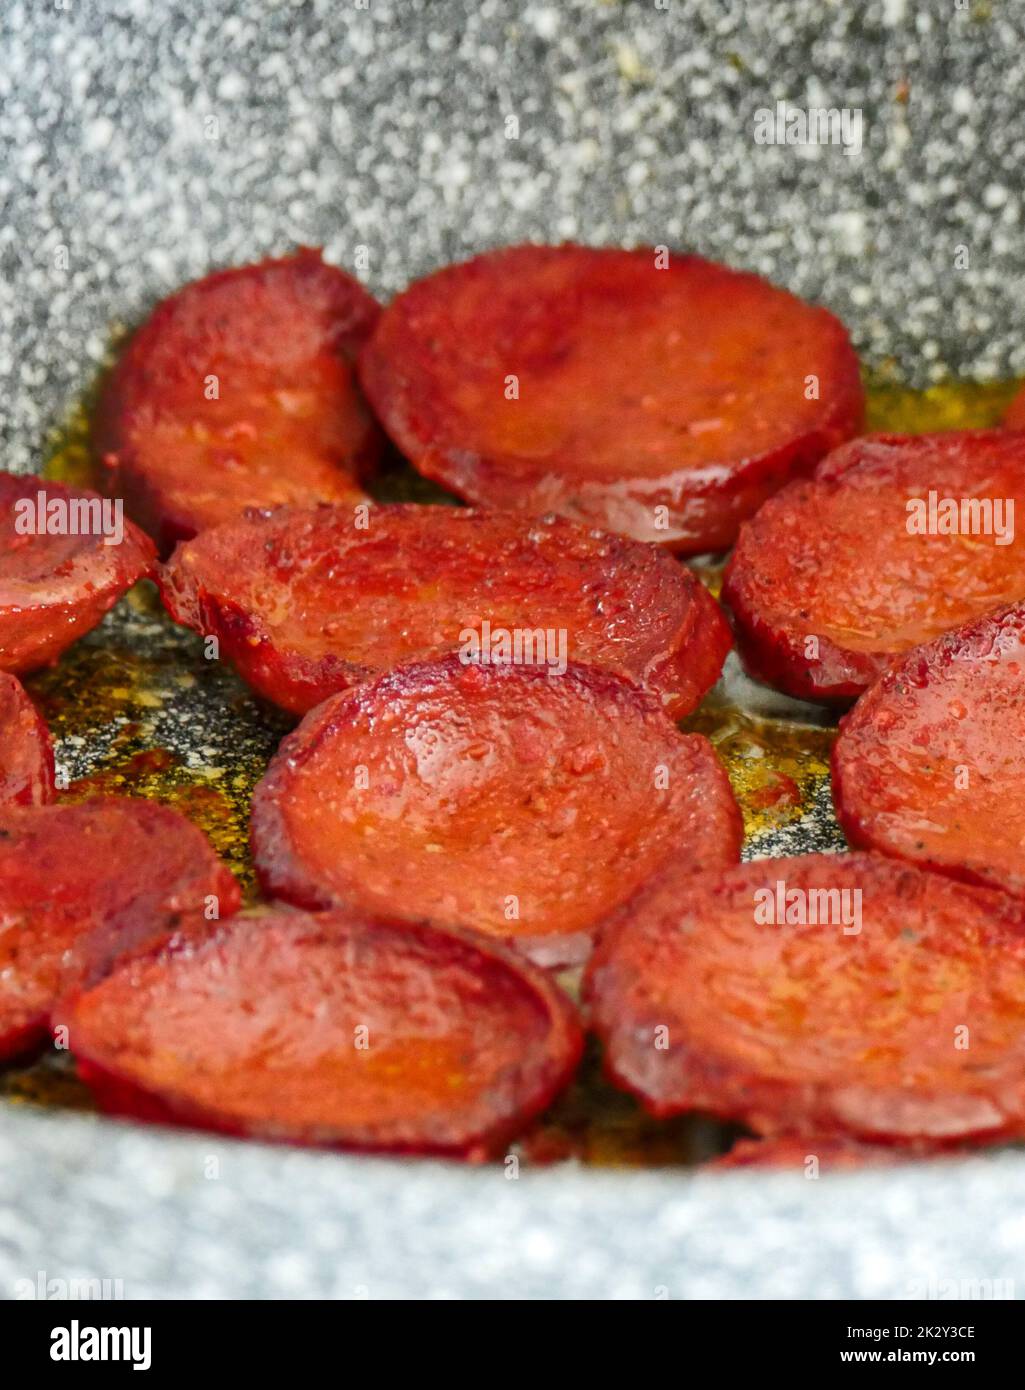 Turkish style pan fried beef sausage with large slices, hot beef sausage is cooked in the pan Stock Photo